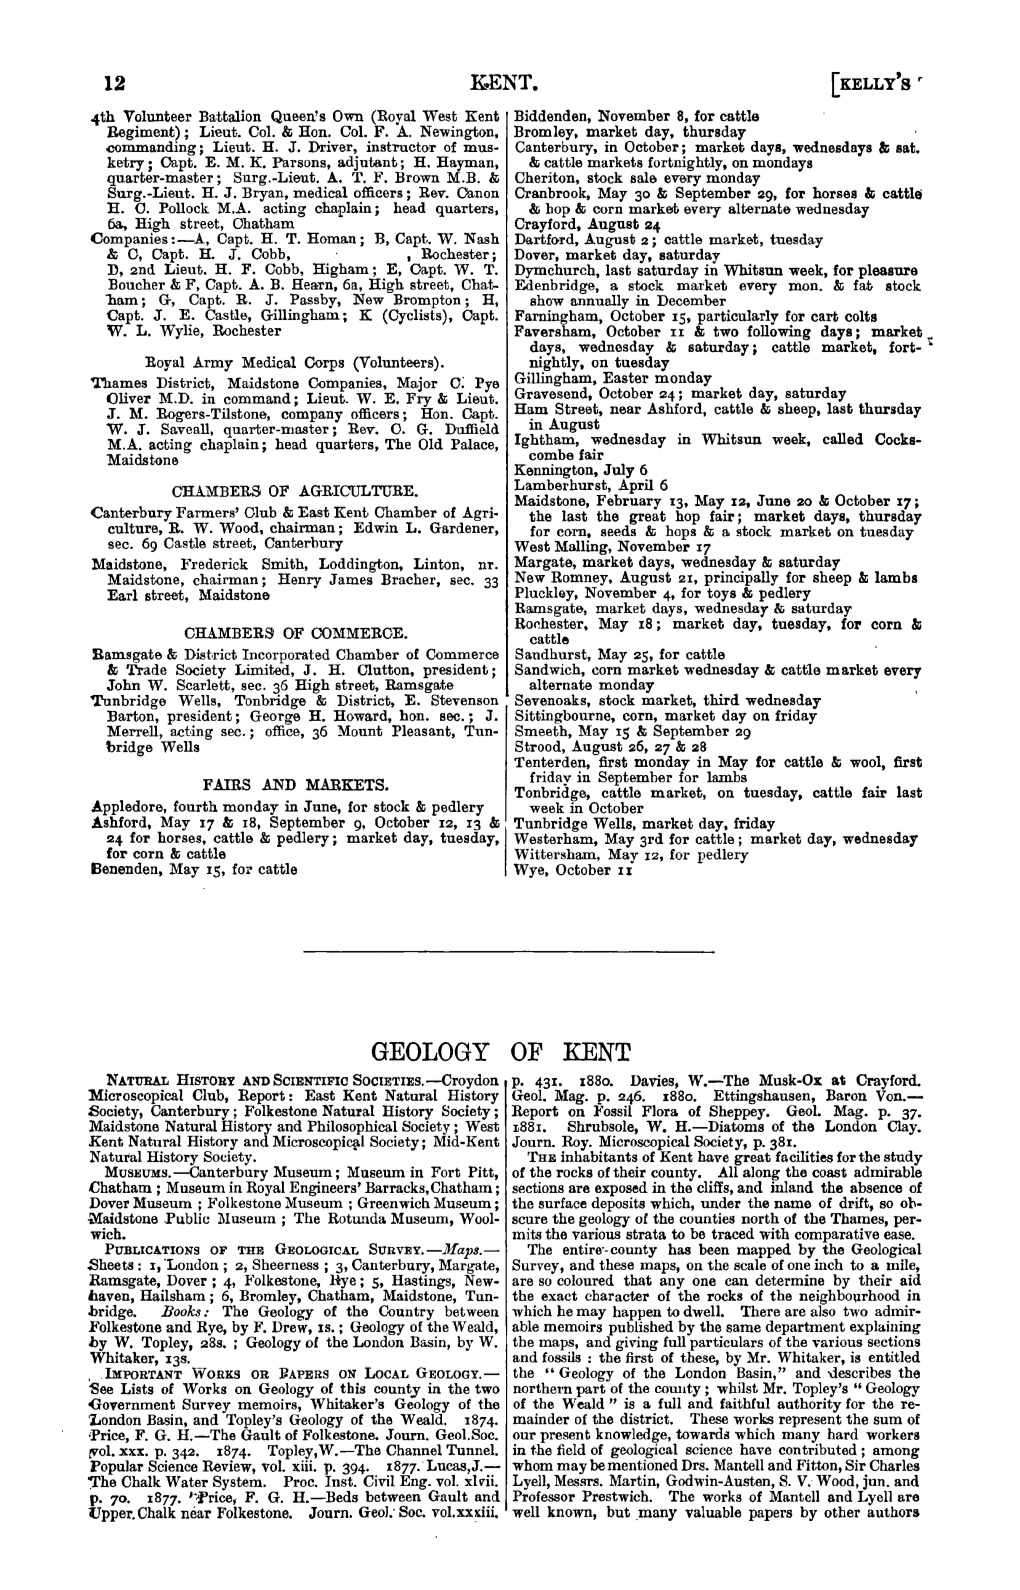 GEOLOGY of KENT NATURAL HISTORY and SCIENTIFIC Societies.-Eroydon P